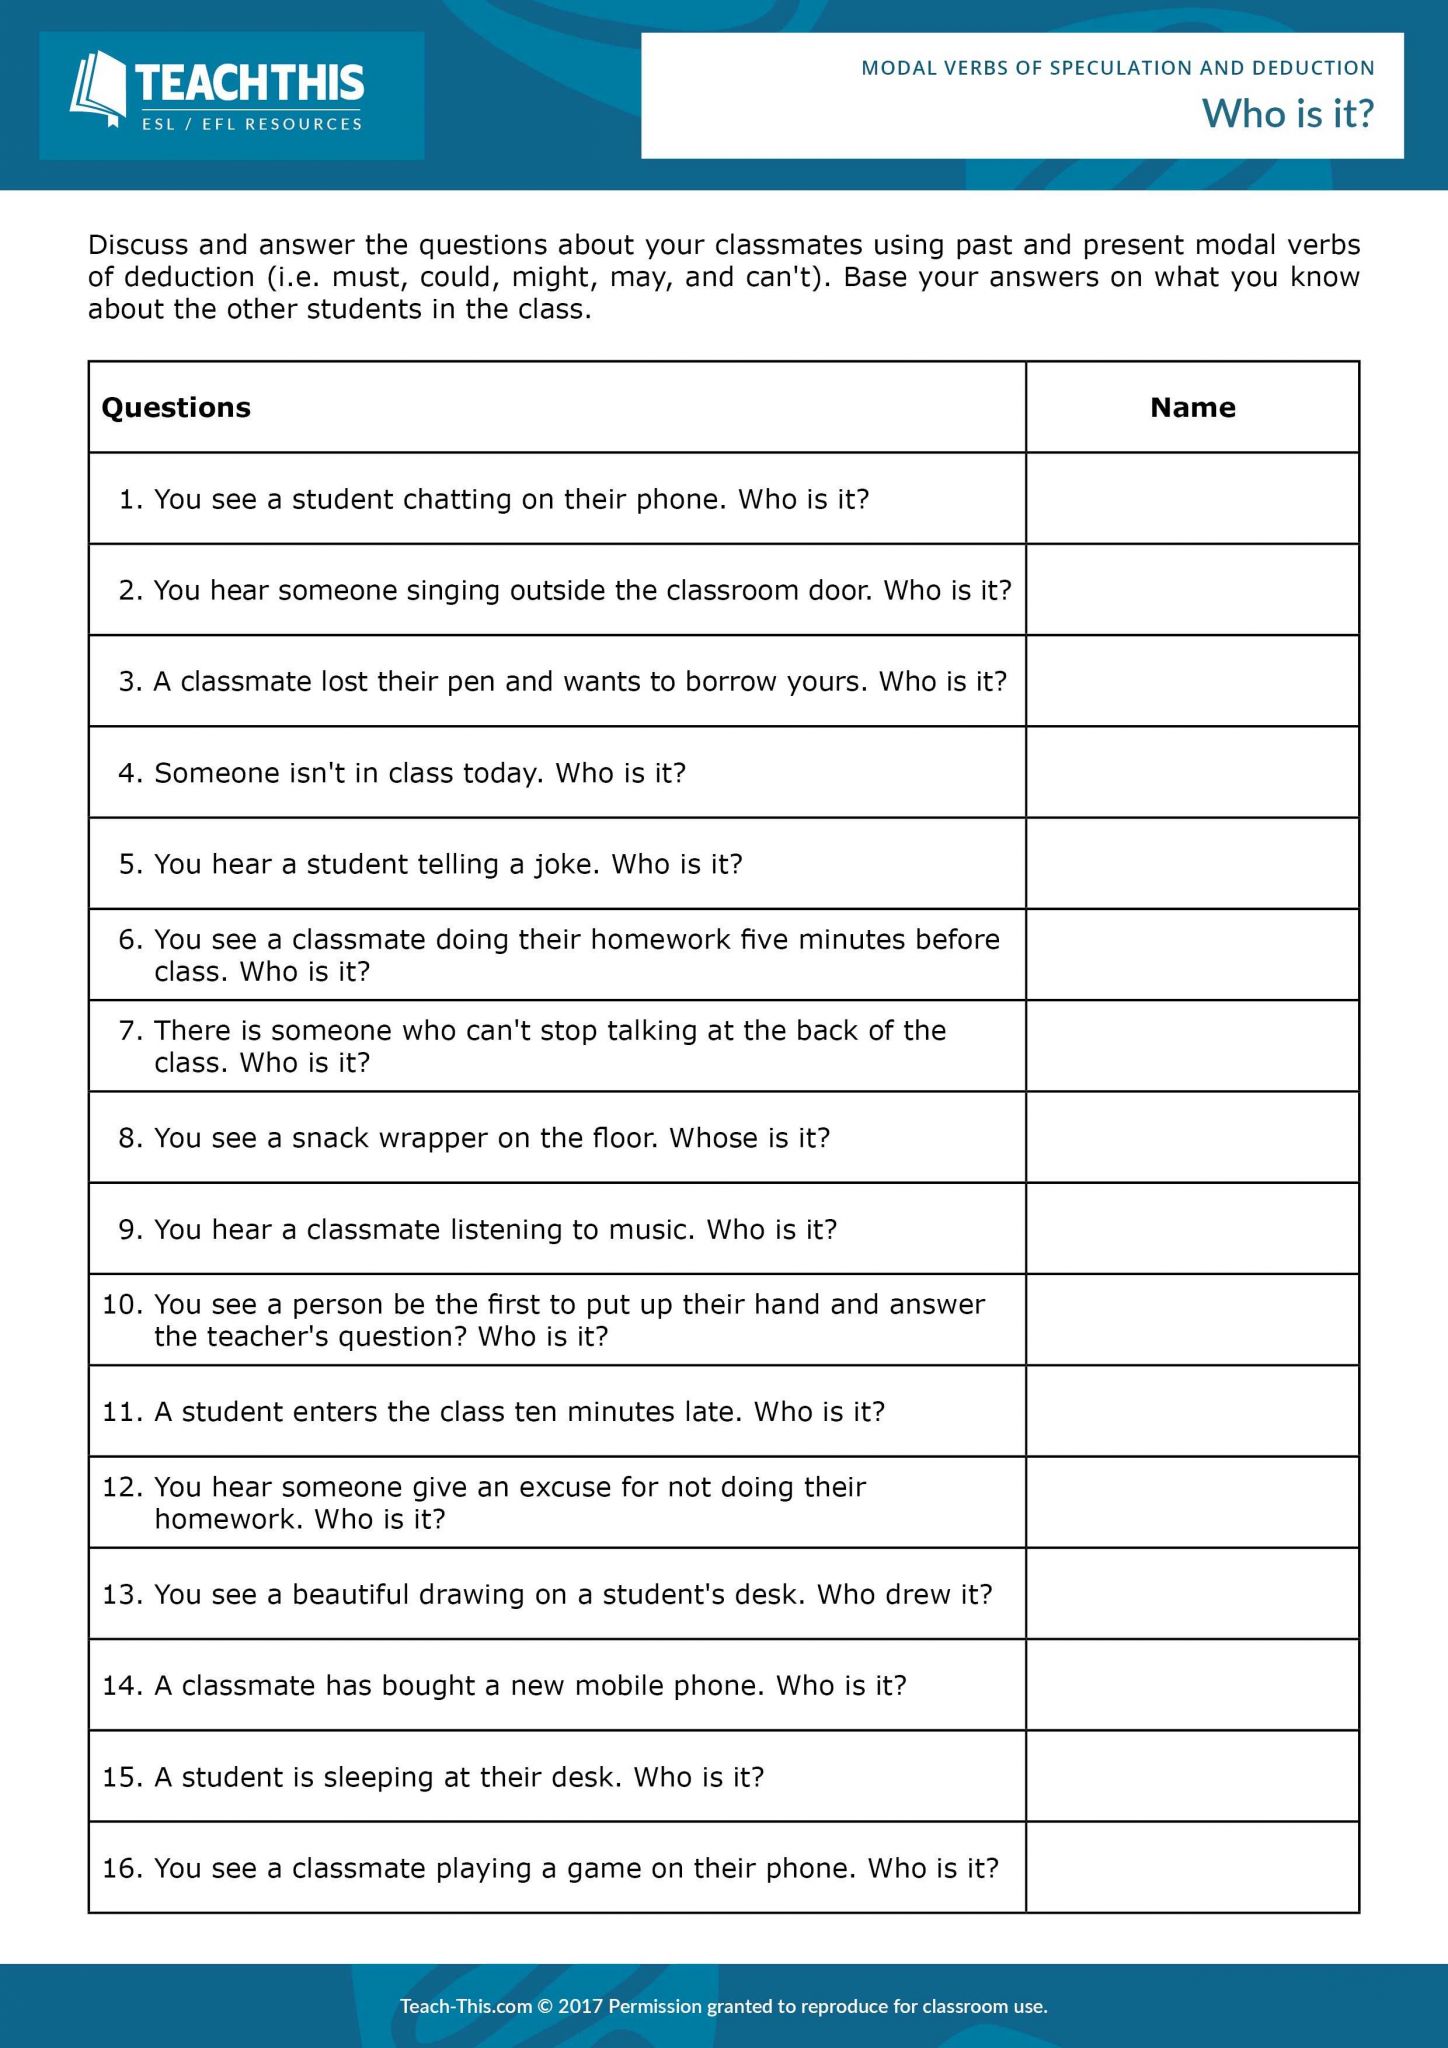 Spanish Present Subjunctive Worksheet Pdf Along with Conditional Statements Worksheet with Answers & Probability Tree